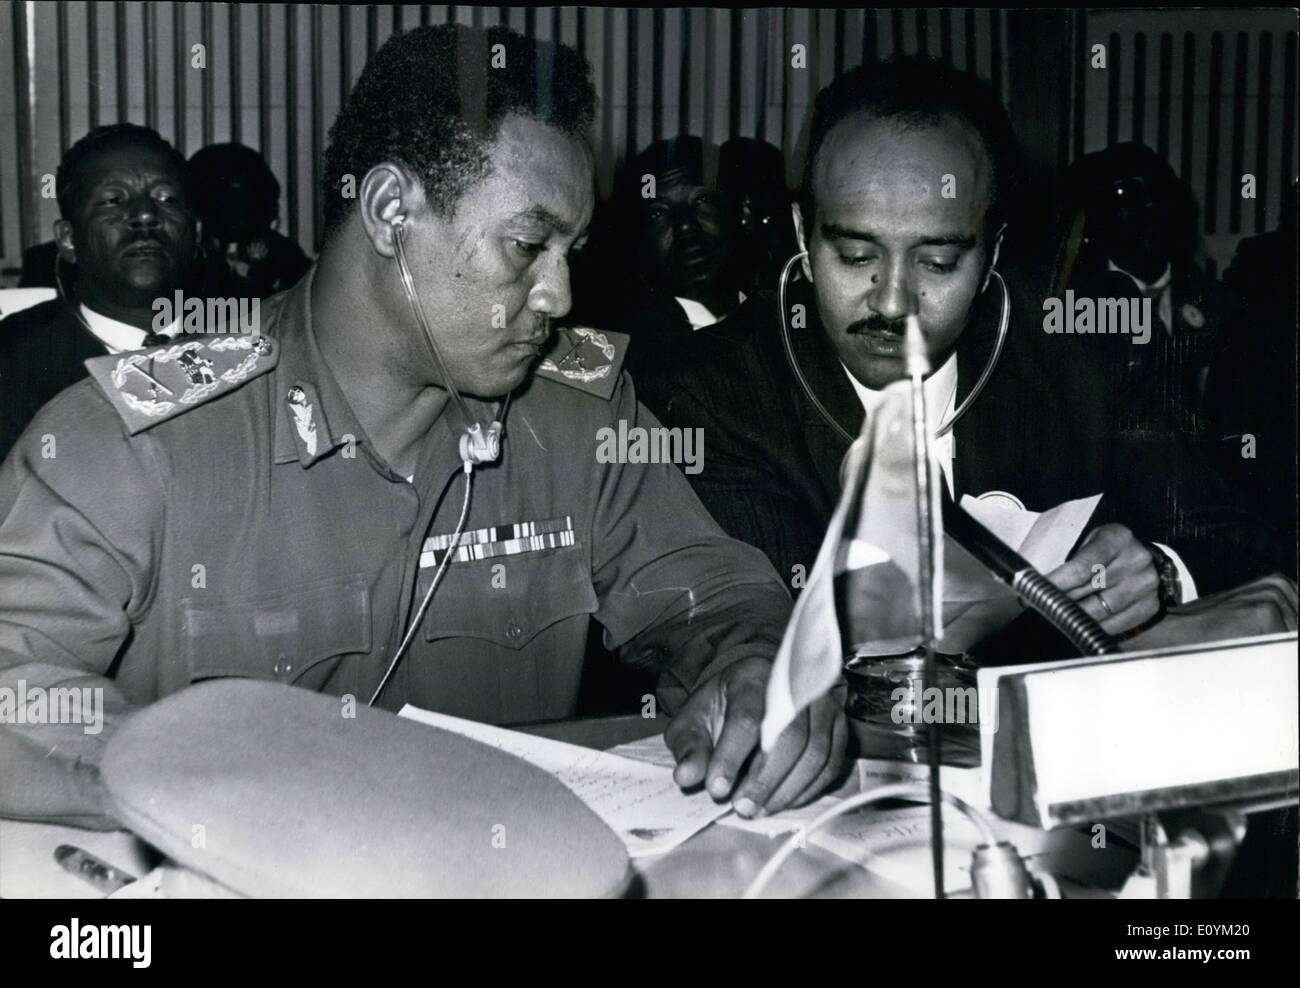 Sep. 09, 1970 - Addis Ababa Ethiopia: Maj Gen Jaferm El-Numeiry President of Sudan at the OAU Heads of States Summit. Stock Photo